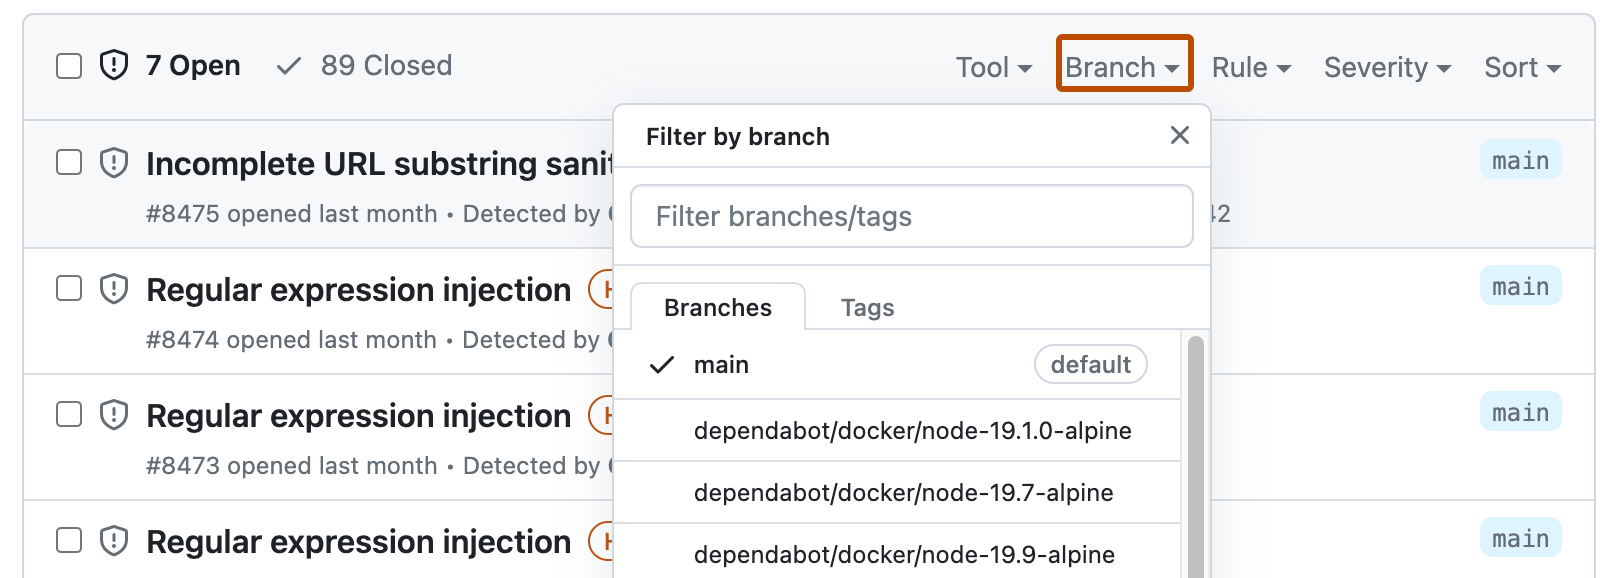 Filtering alerts by branch